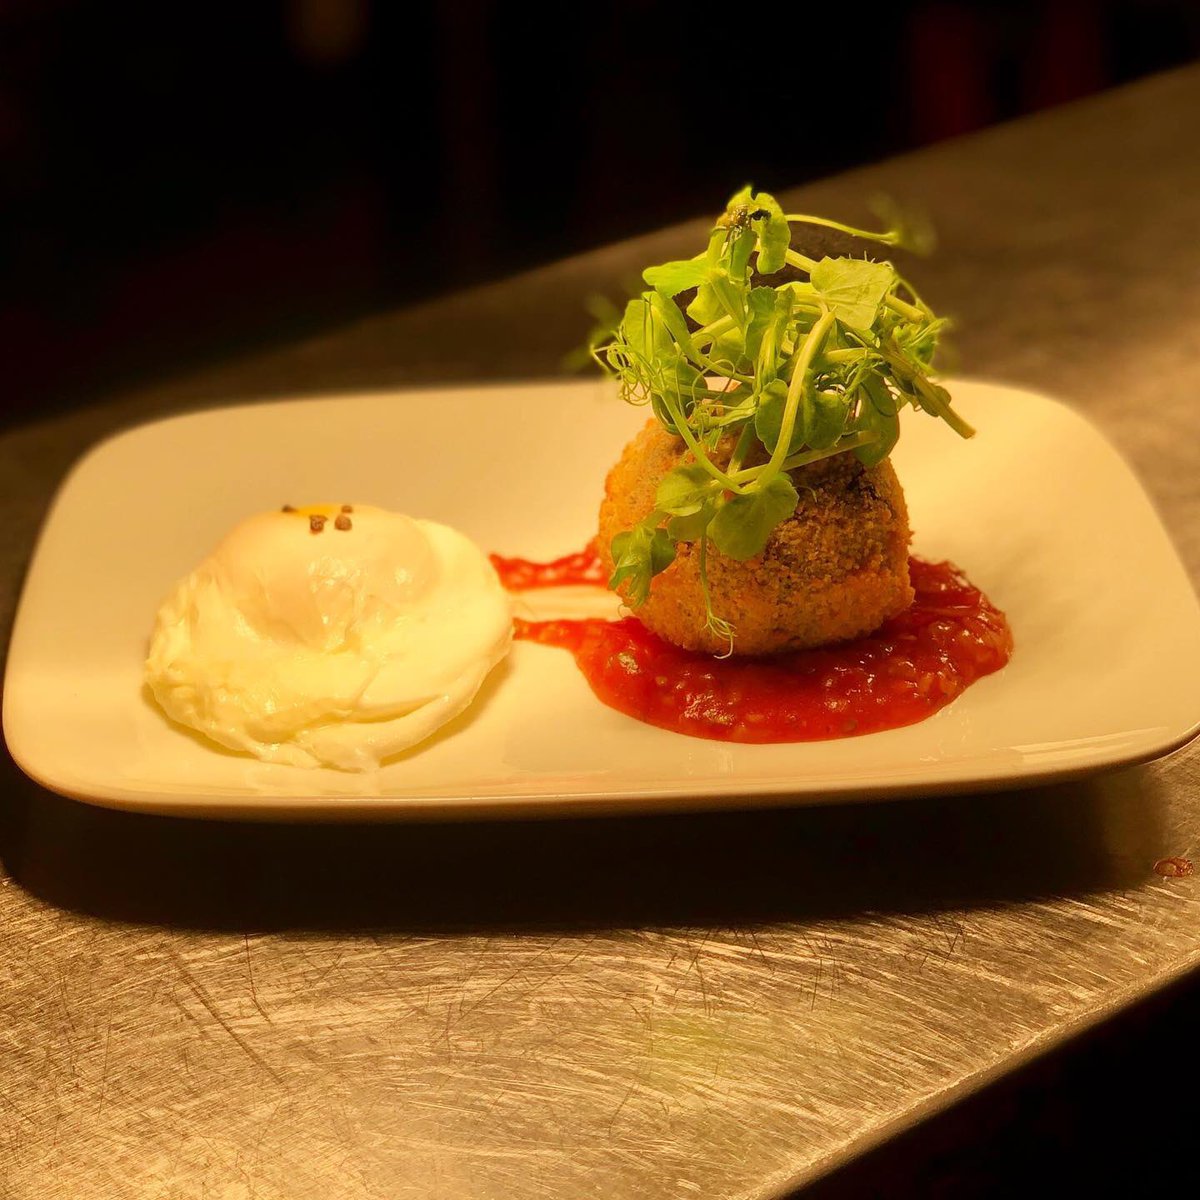 Have you tried our Lancashire cheese and black pudding Bon-Bon? It’s served with a poached egg and homemade relish and it’s one of our new light bites 😋

#homemade #buryblackpudding #lancashirecheese #pubfood #thevictoriawalshaw #lightbites